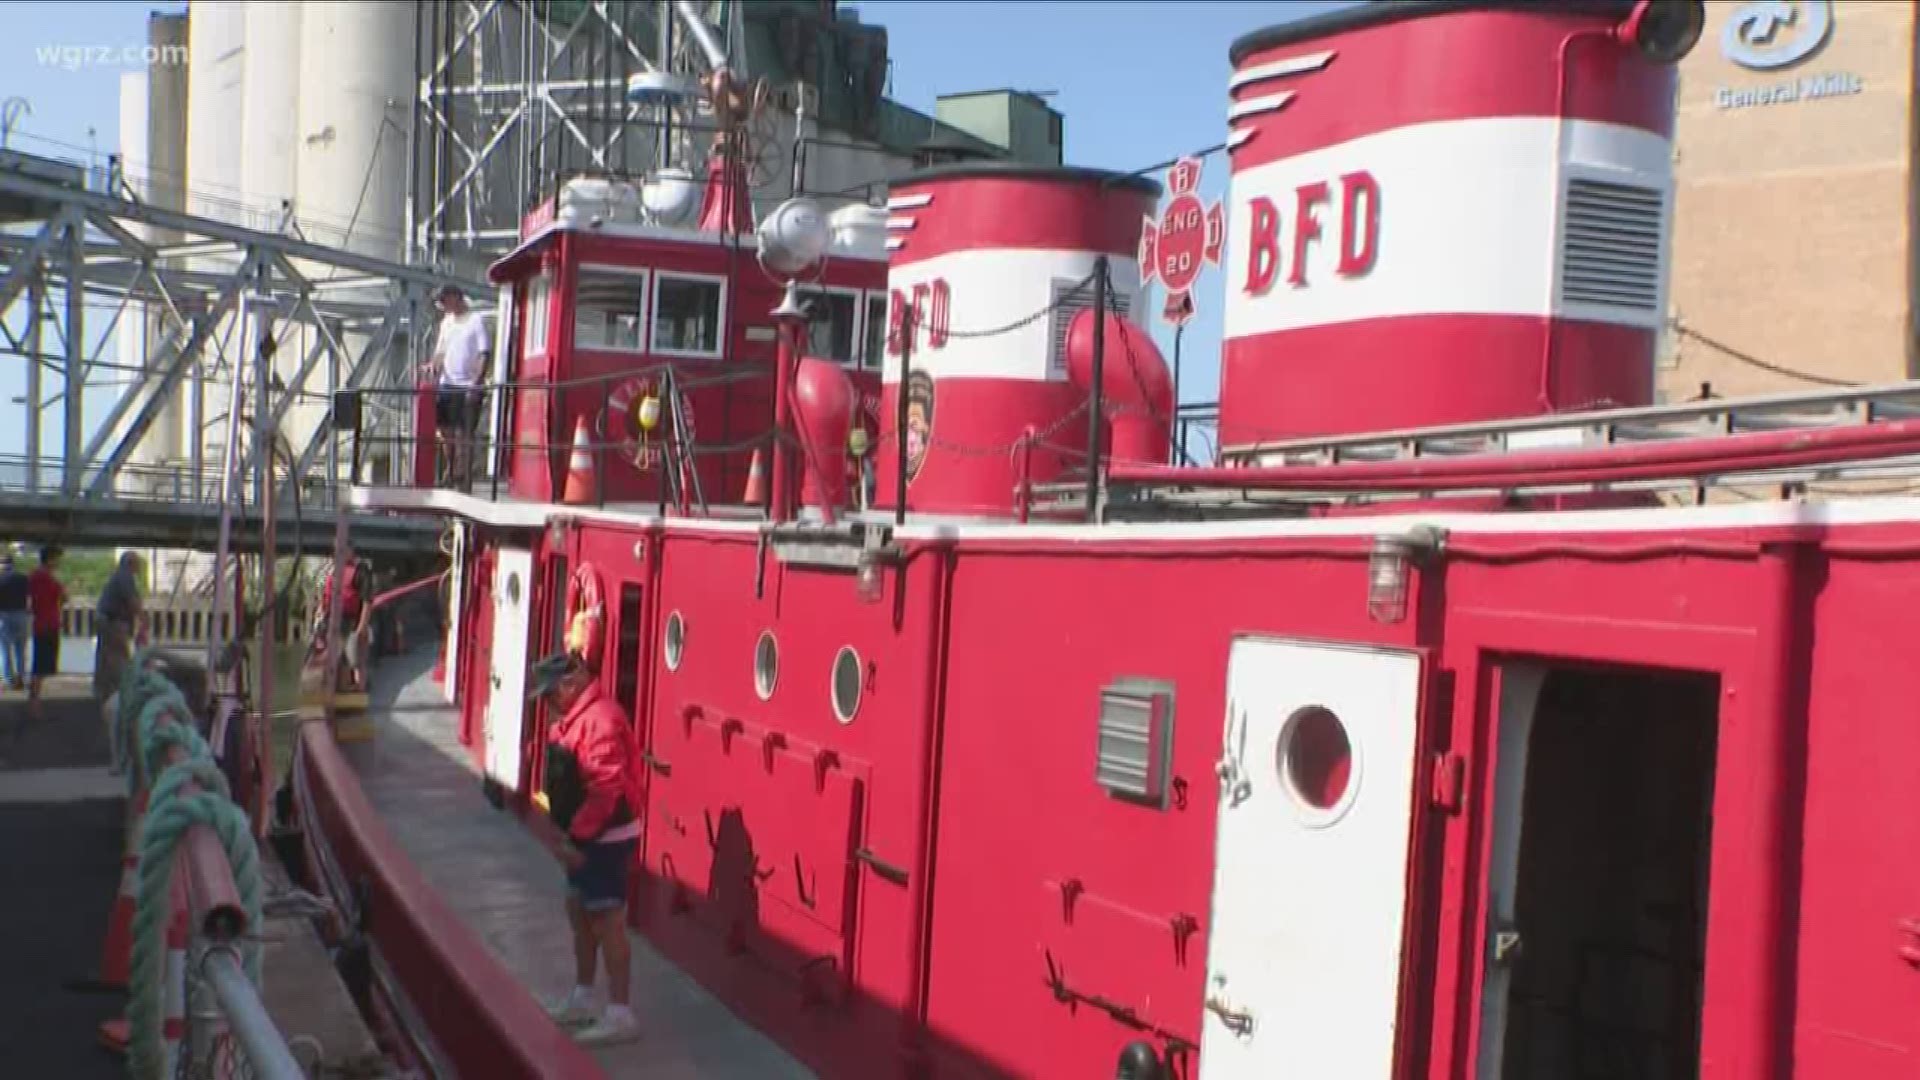 The Fireboat Cotter Conservancy got grants to fix the hull and new propellers so it can continue service as the oldest active fireboat in the world